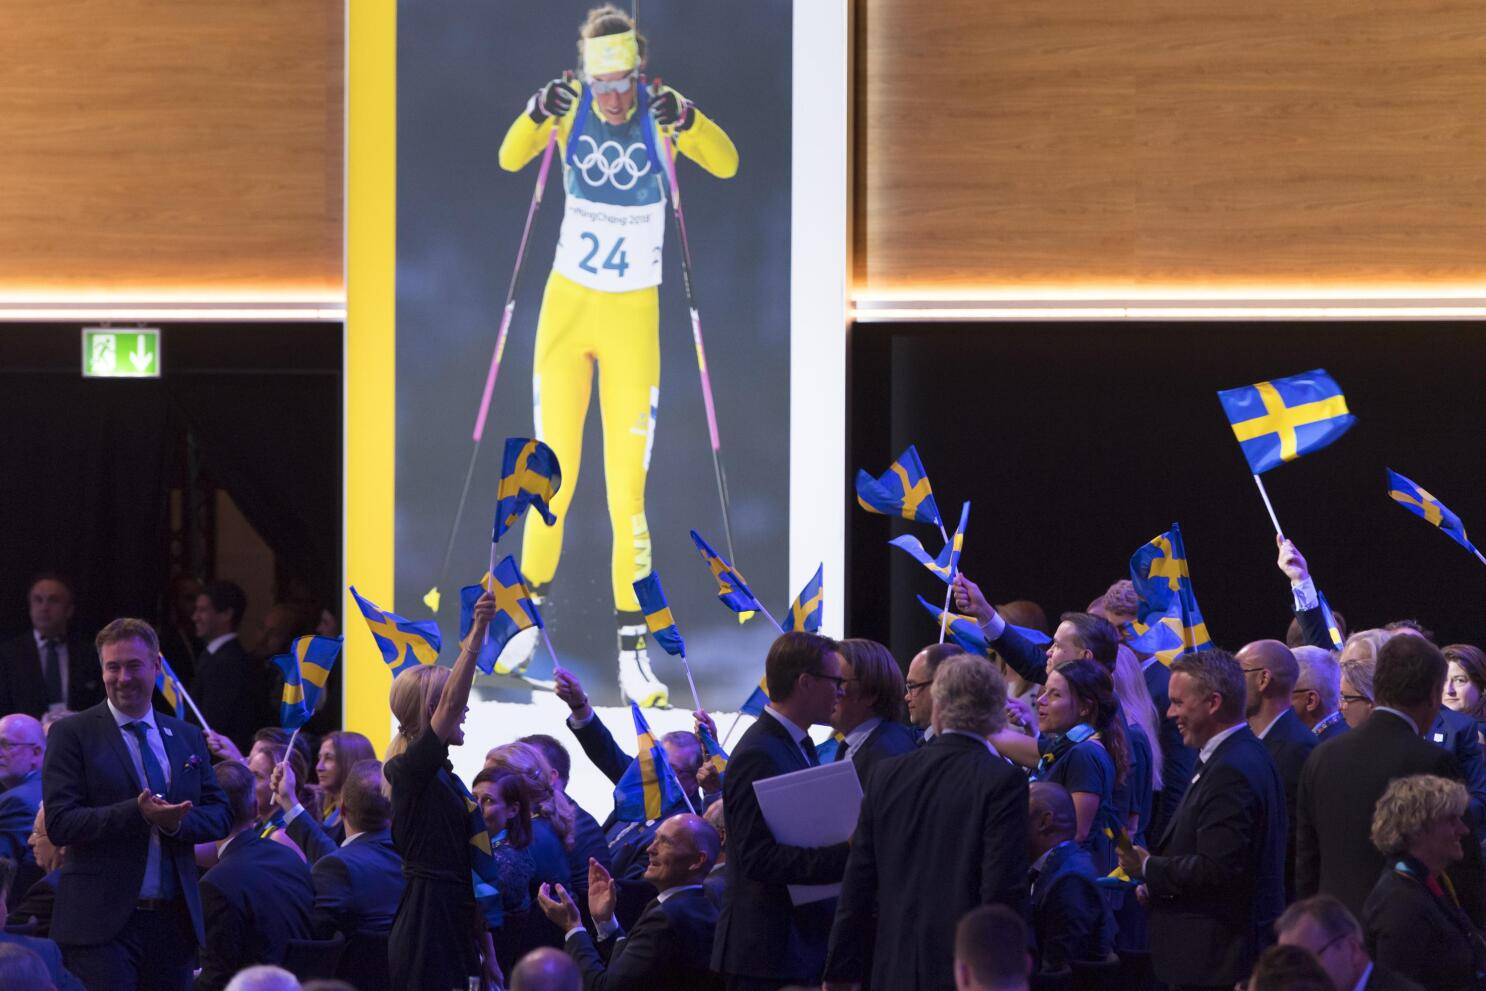 Sweden has bid unsuccessfully eight times for the Winter Olympic Games but is back with another campaign for 2030 ©Getty Images